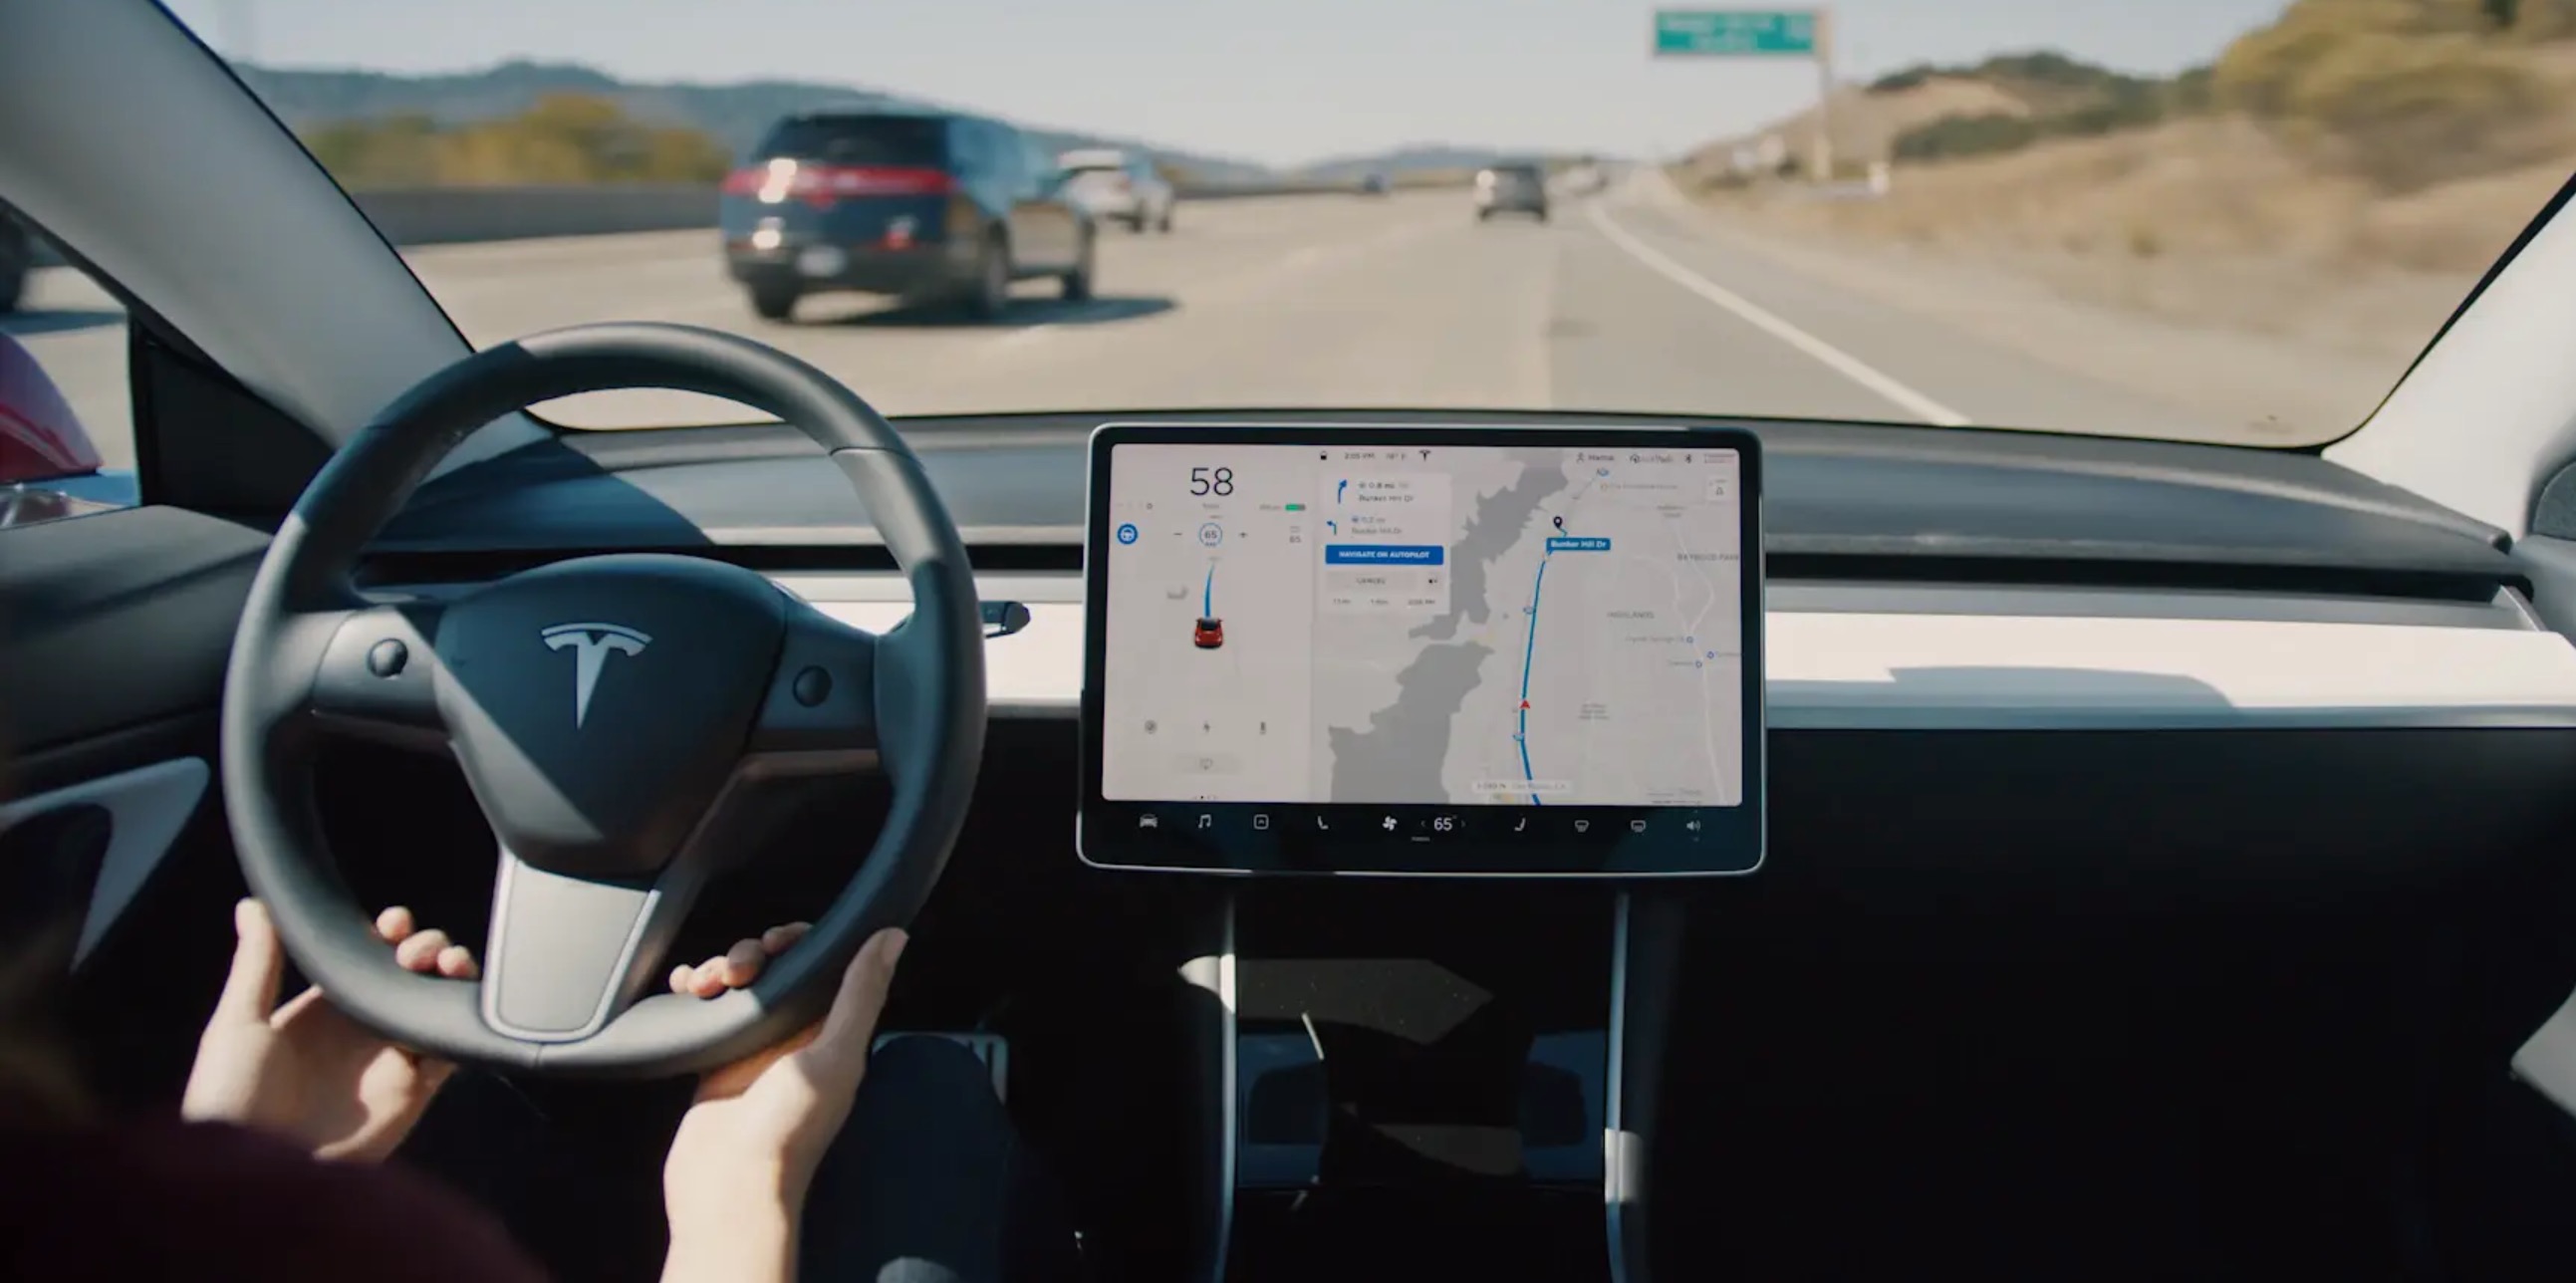 Tesla reintroduces Enhanced Autopilot with some FSD features in